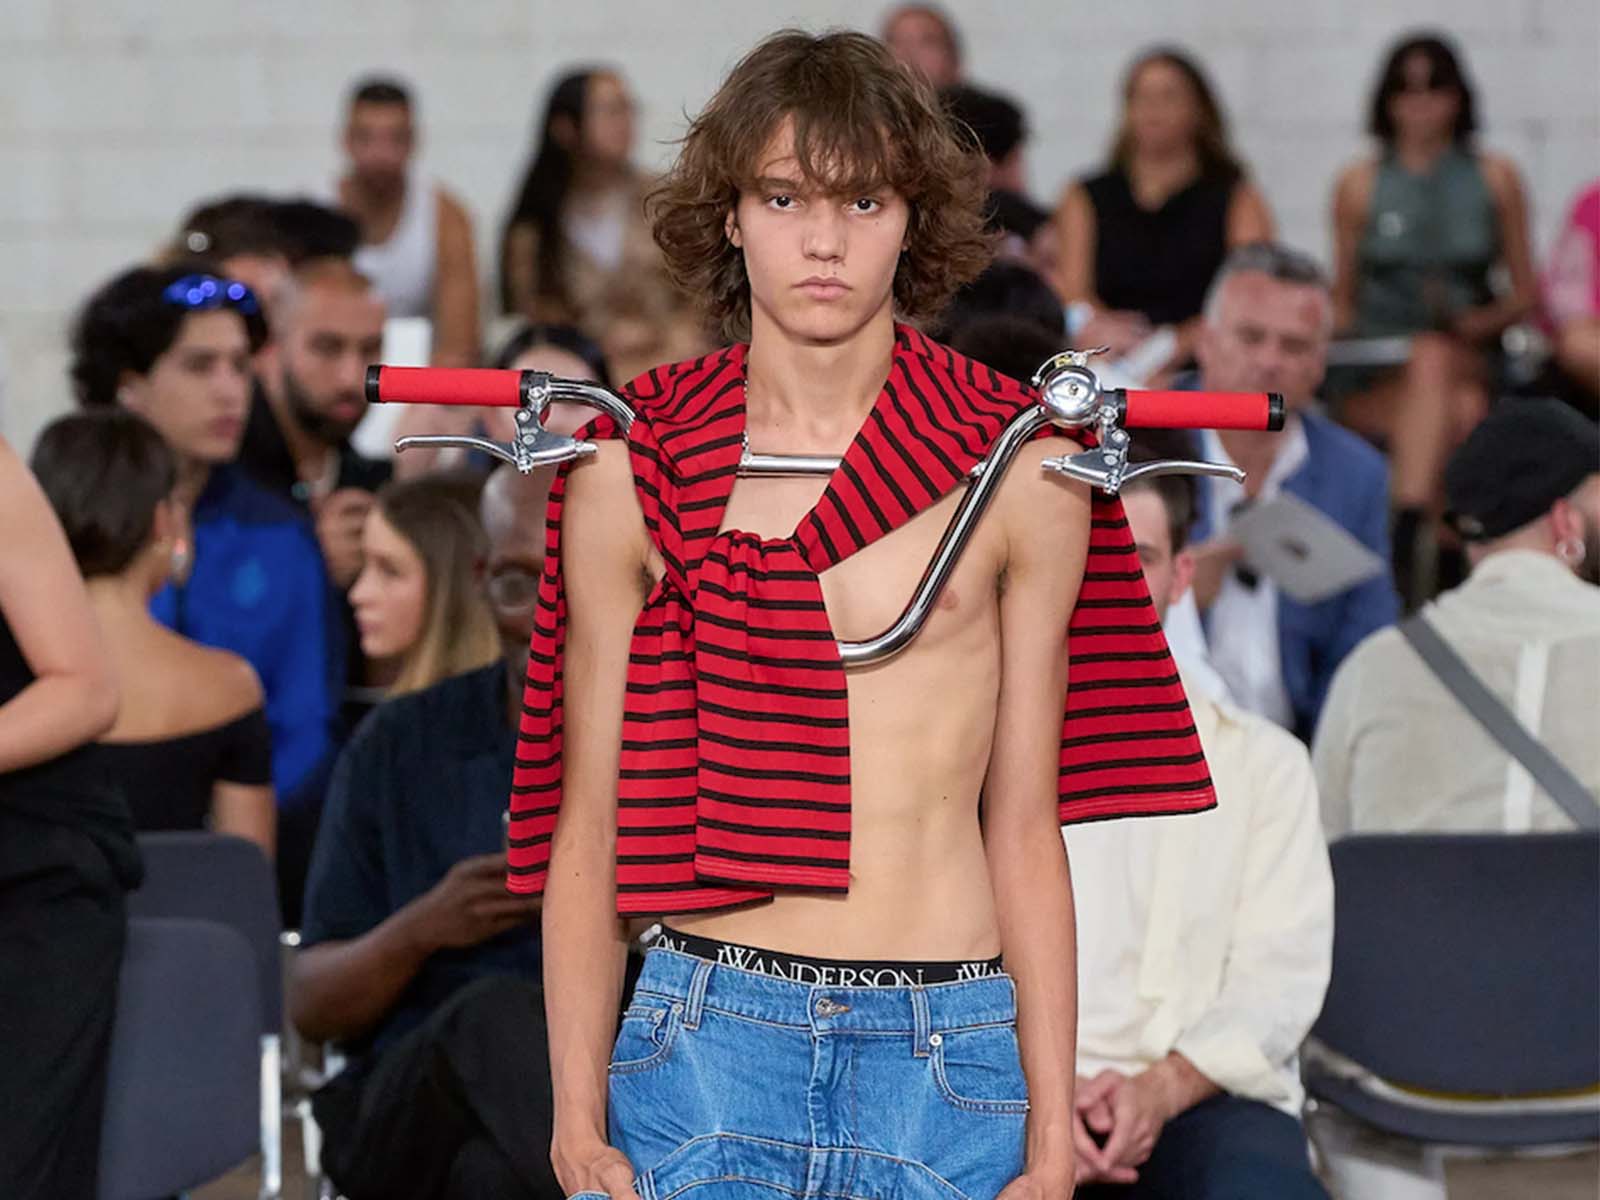 JW ANDERSON grabs all the attention at Milan Fashion Week